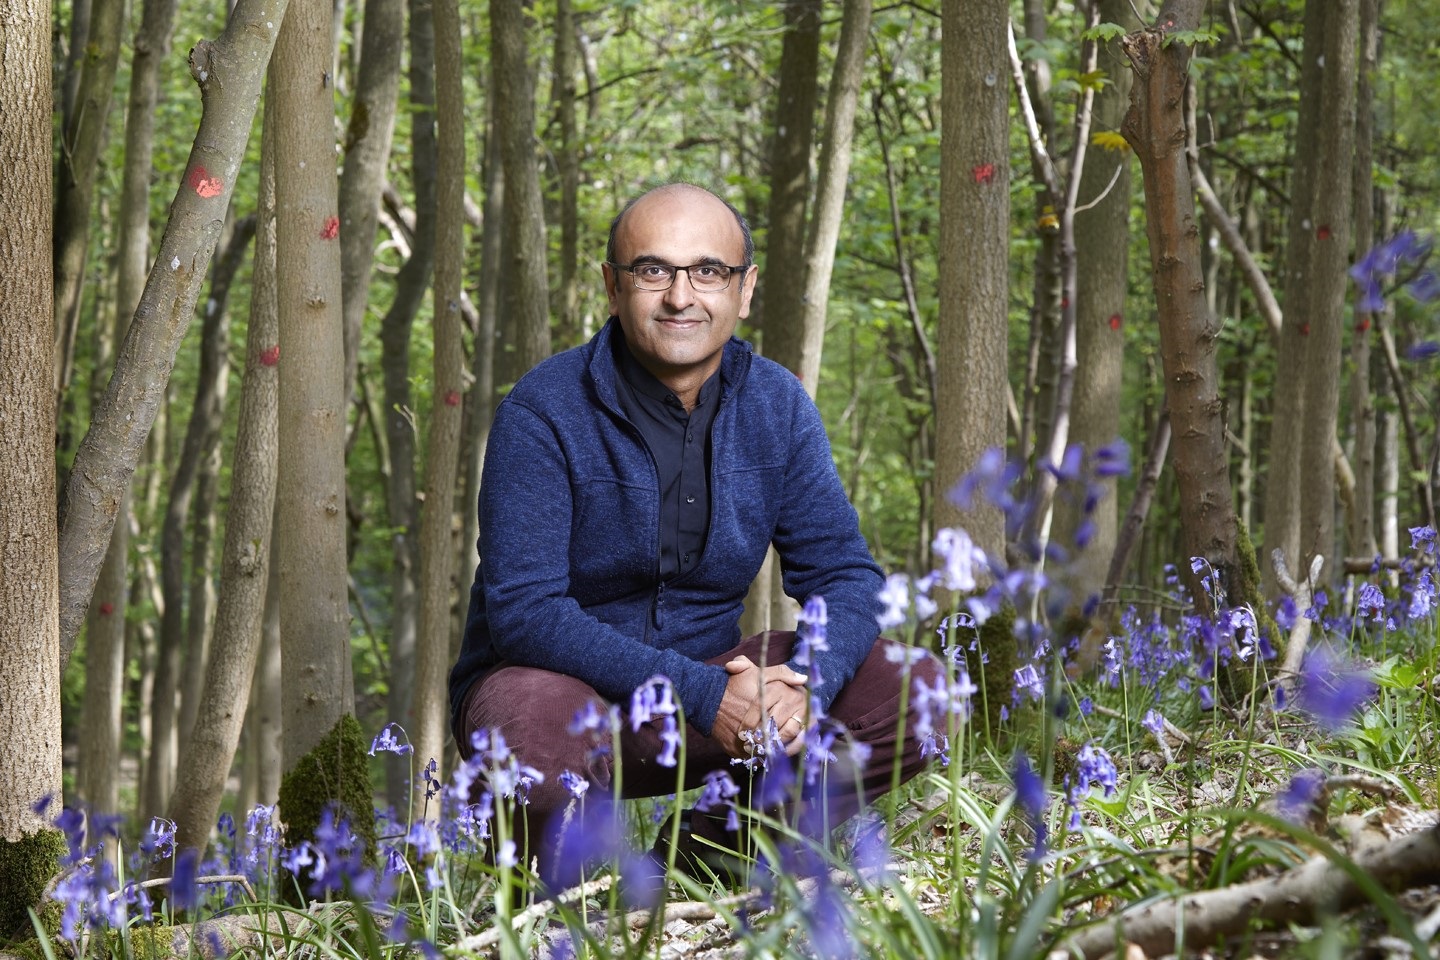 Man crouching among bluebells with trees behind